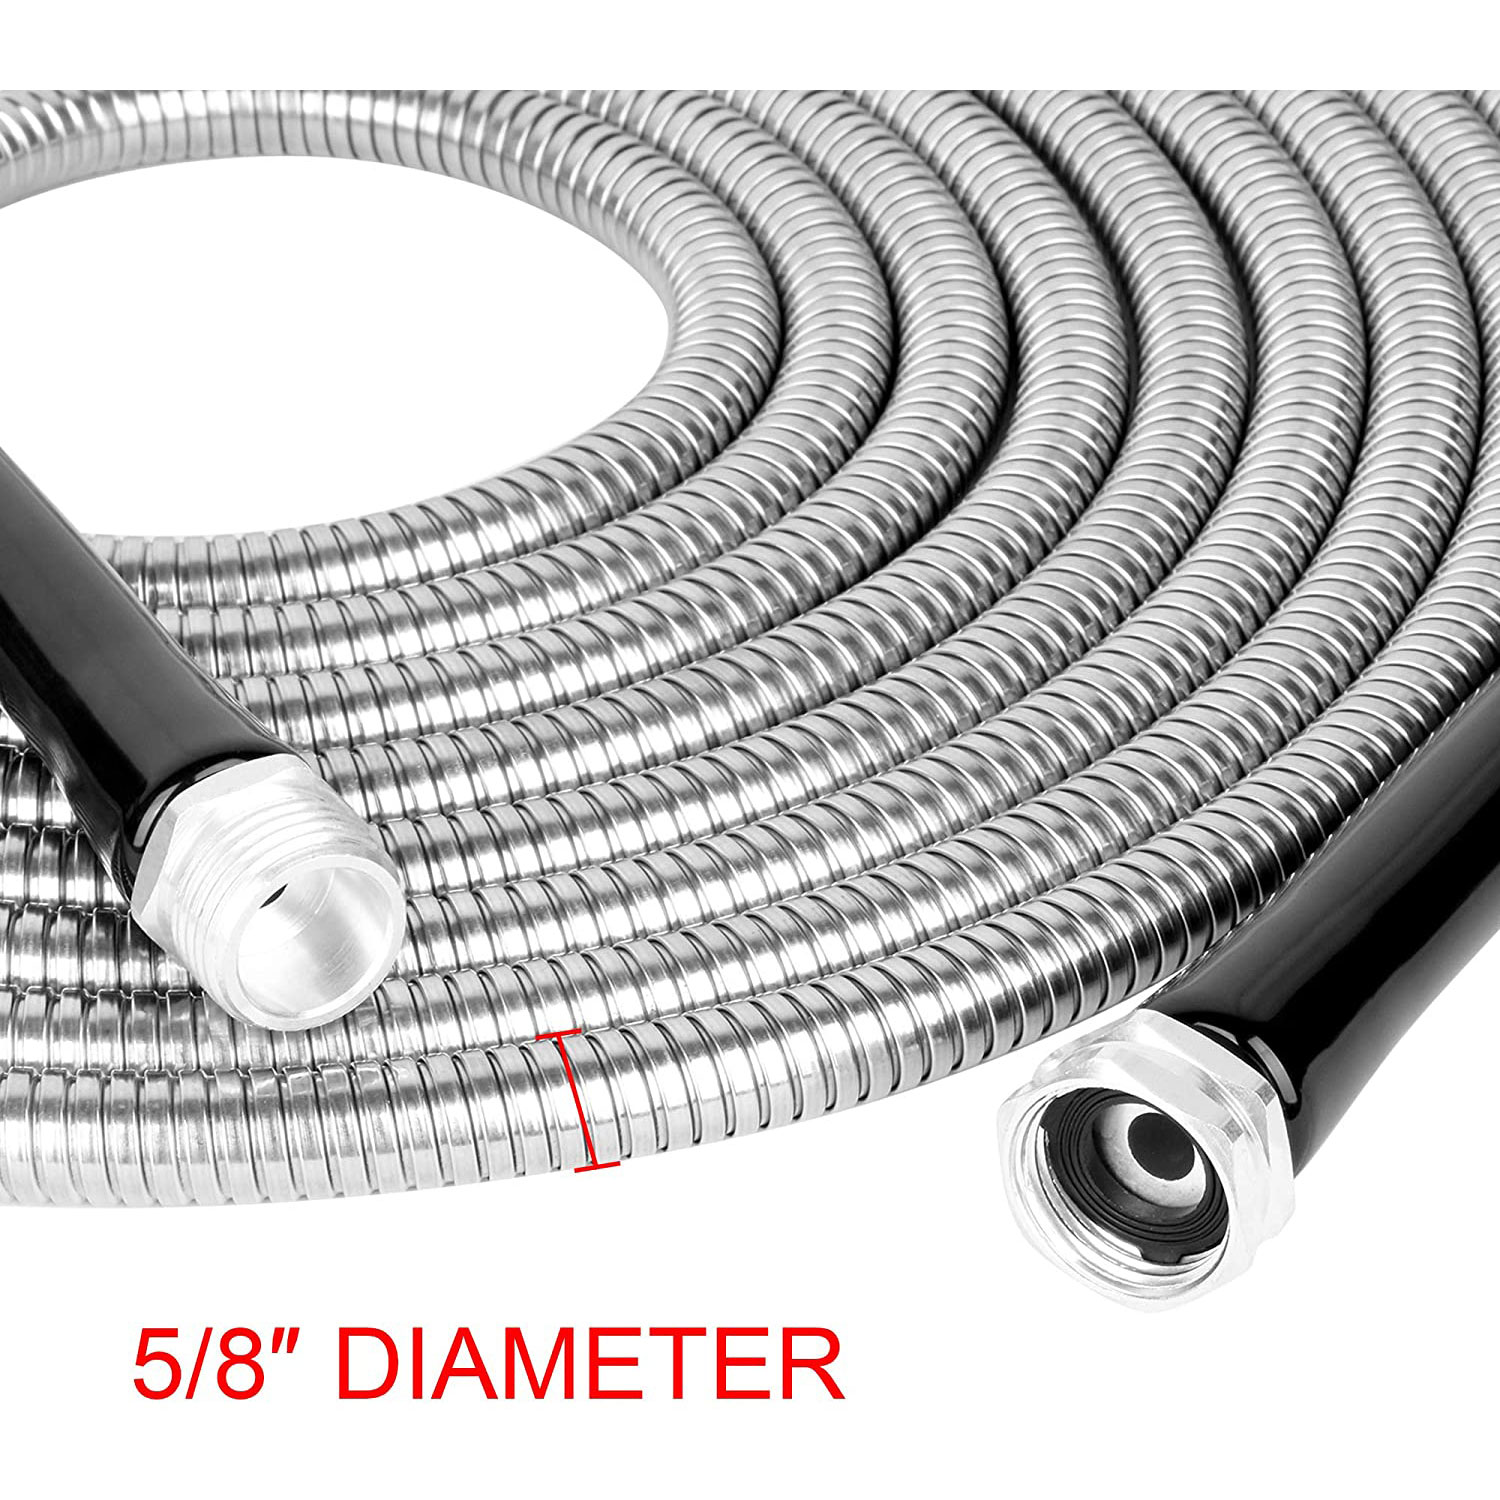 Specilite Heavy Duty 100 Ft Stainless Steel 10 Spray Pattern Nozzle 100 Ft Stainless Steel Hose